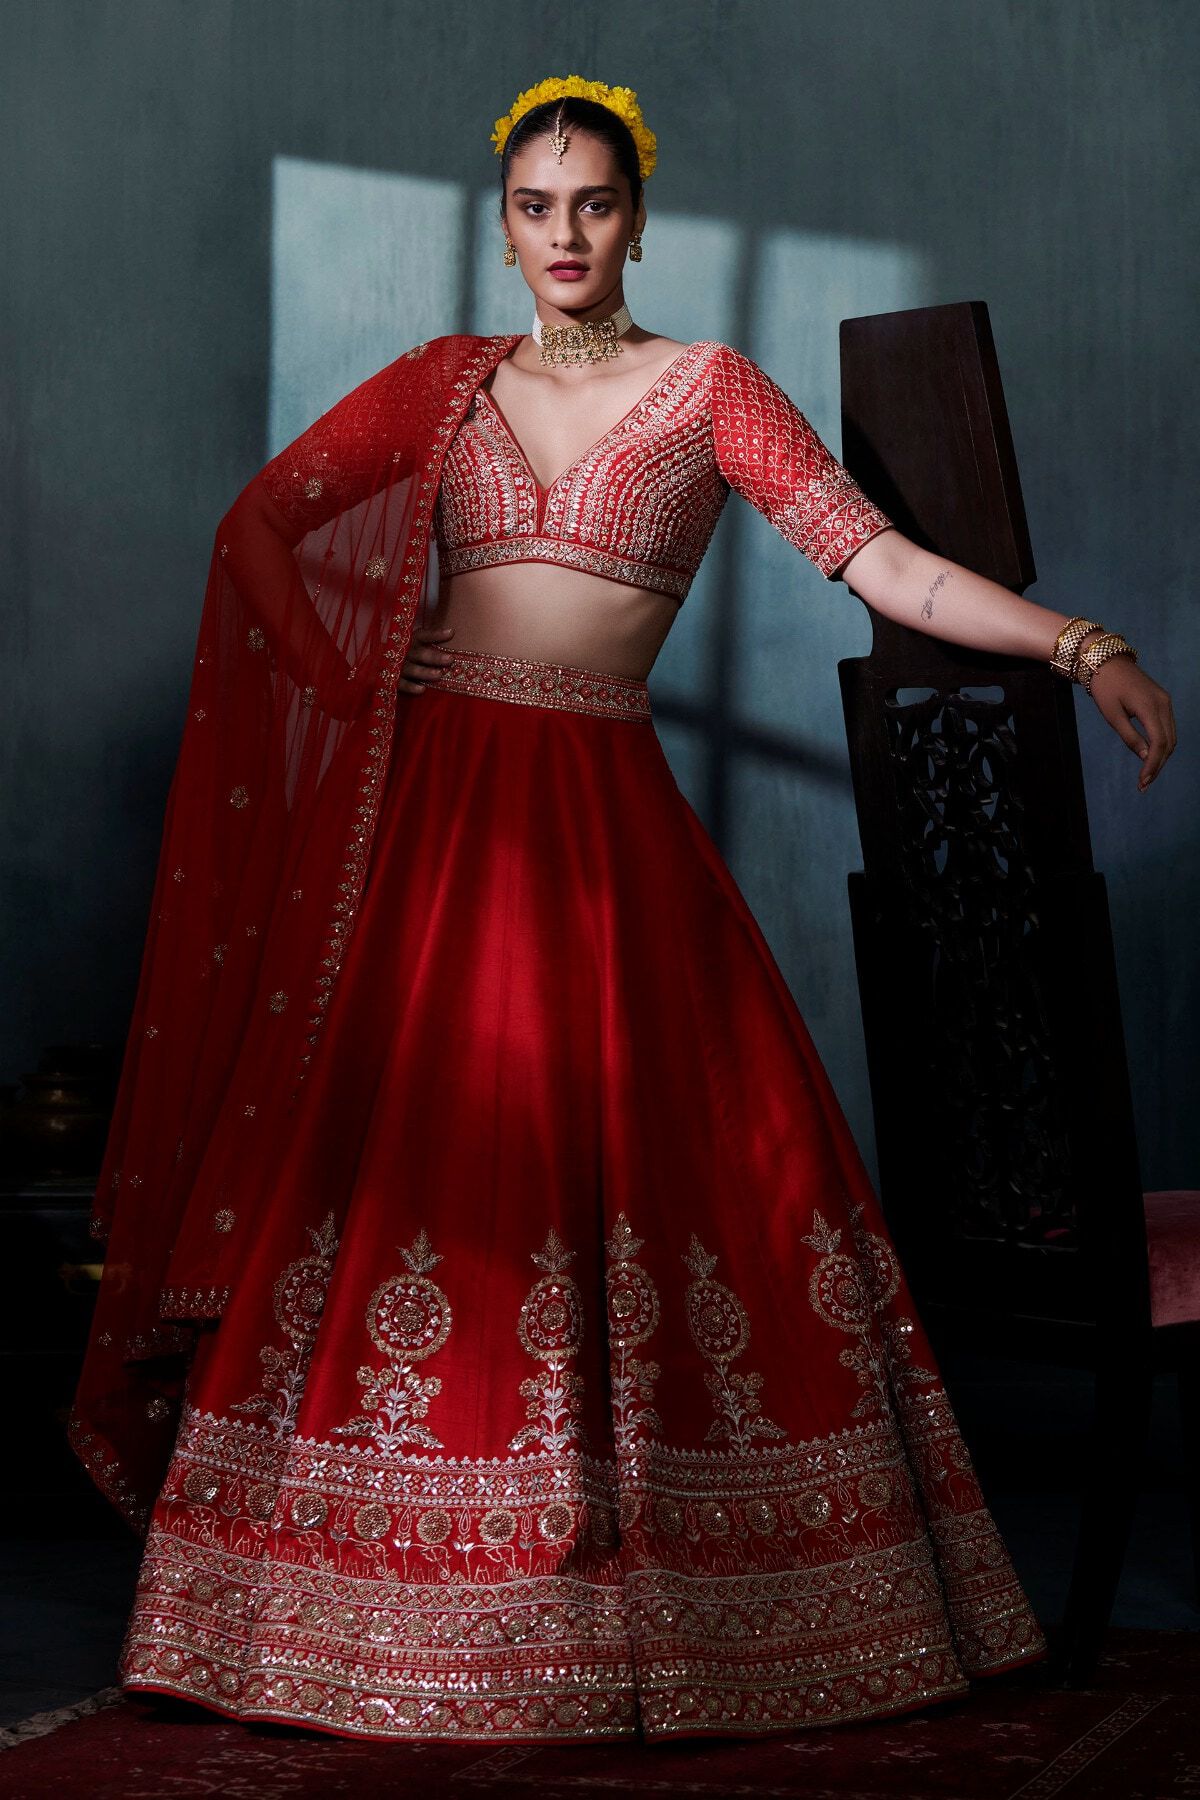 15 Gorgeous Lehengas You Can Get From Anita Dongre In Under A Lakh! |  Indian wedding outfits, Indian fashion, Indian fashion dresses